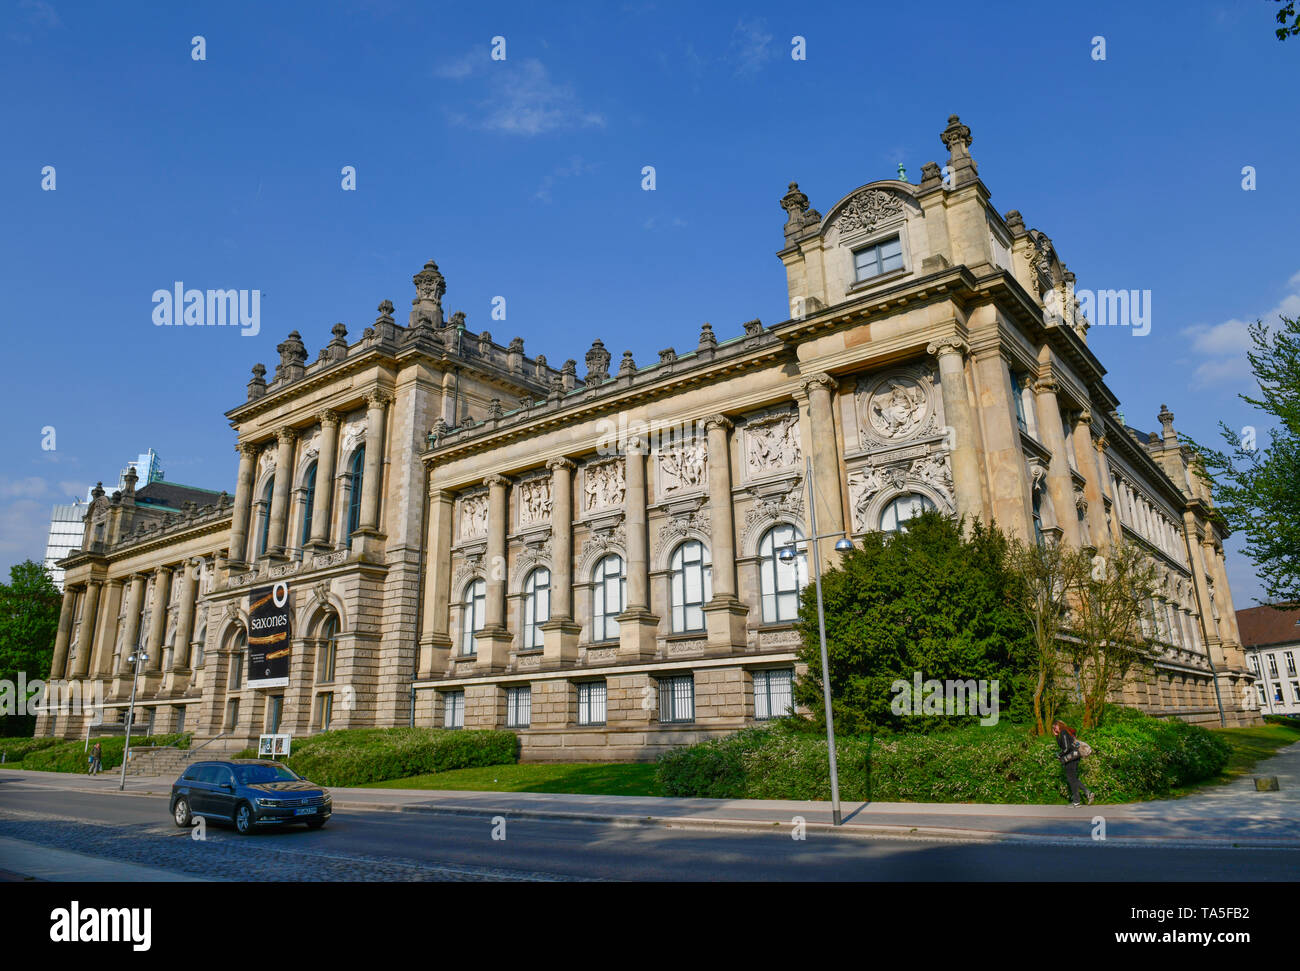 Land museum from Lower Saxony of Hannover, Willy's Brandt avenue, Hannover, Lower Saxony, Germany, Niedersächsisches Landesmuseum Hannover, Willy-Bran Stock Photo